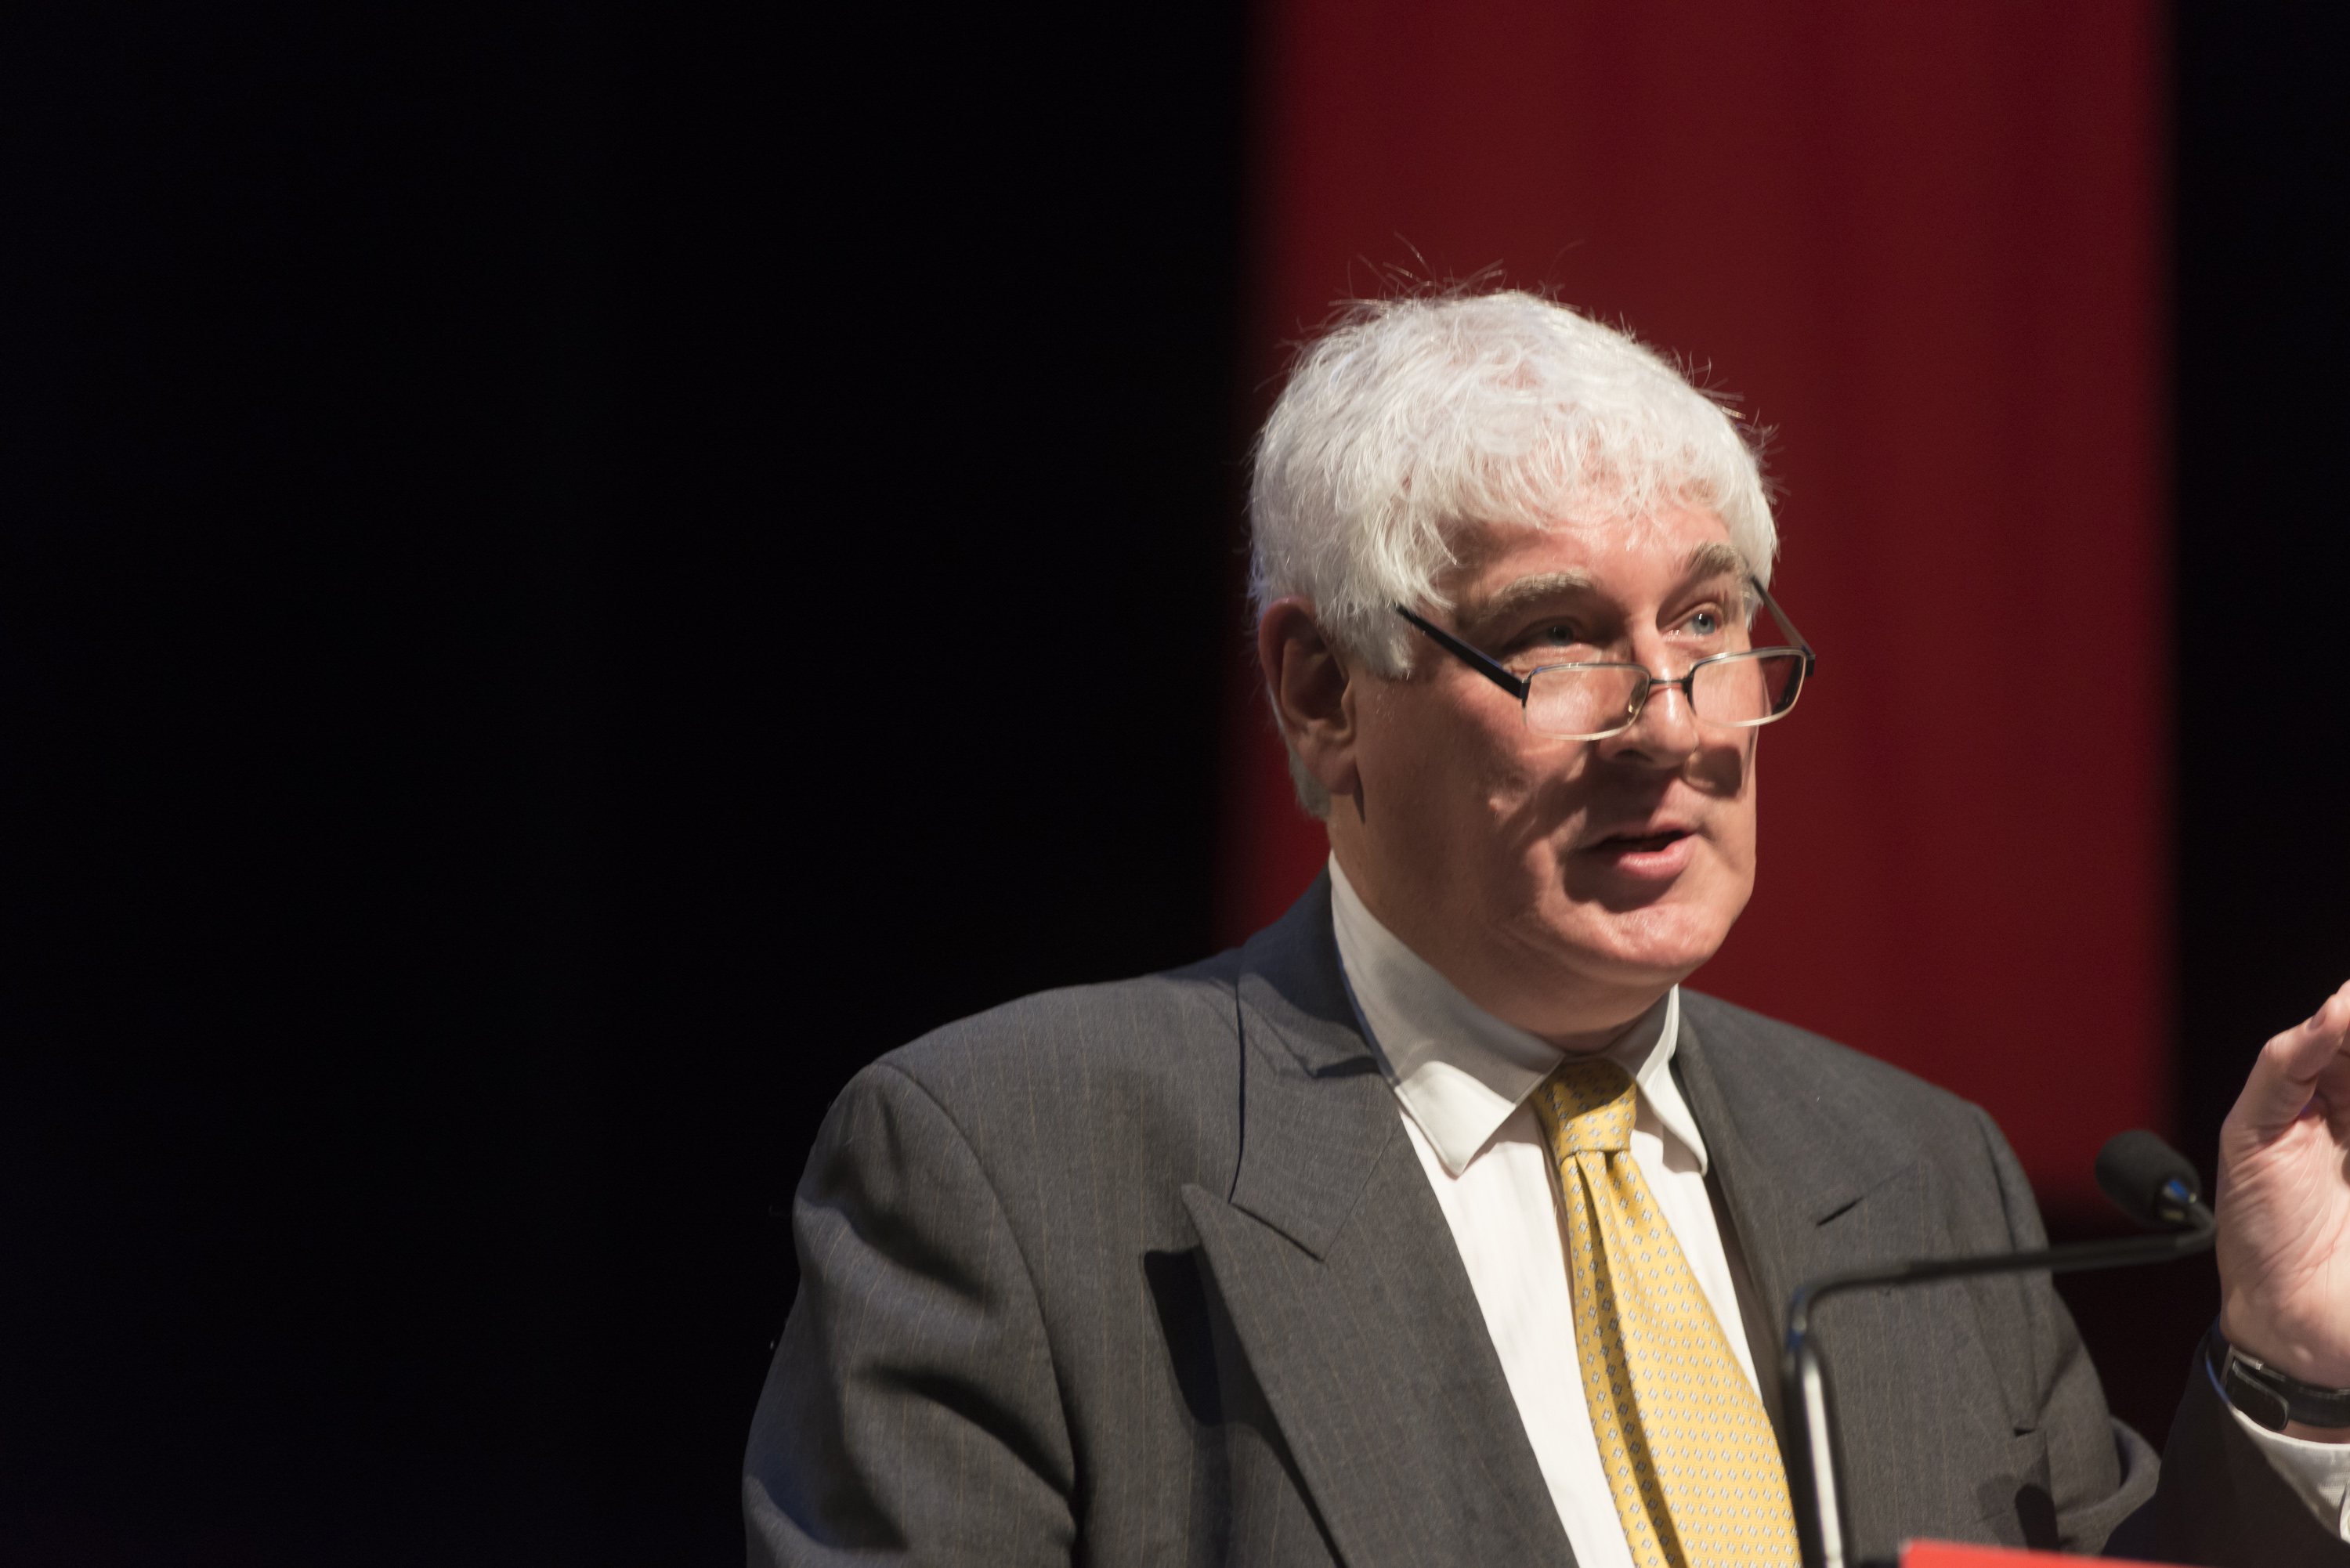 Professor Charles Sampford, Director of Griffith's Institute for Ethics, Governance and Law